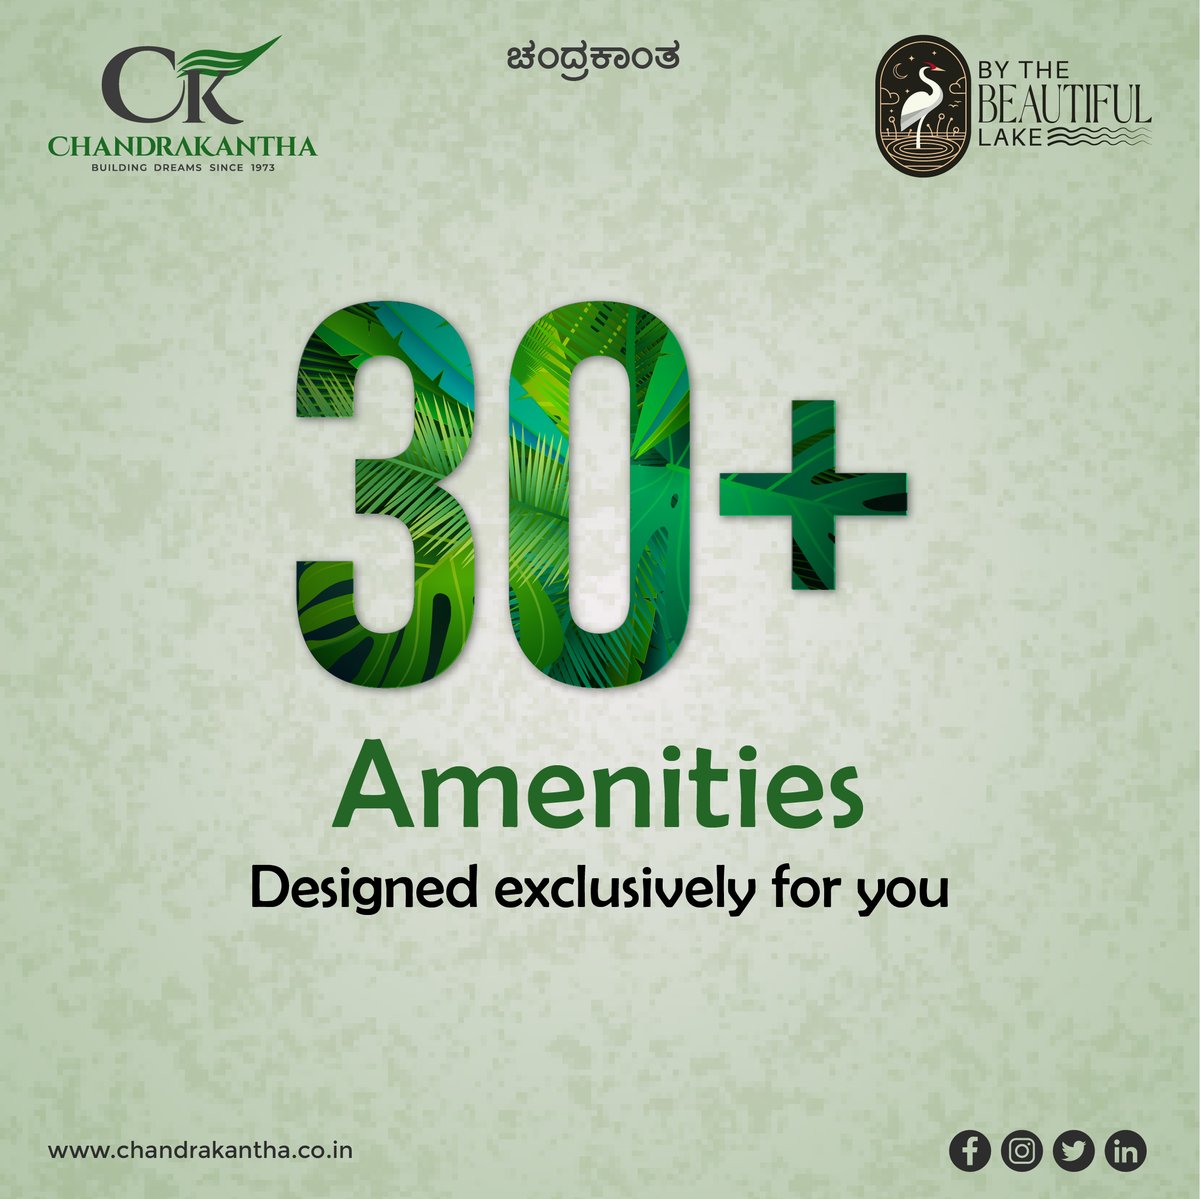 Experience the luxury of choice with over 30+ amenities, each designed exclusively for you. Because your comfort is our priority.
#ExclusivelyYours #AmenitiesGalore #chandrakanthadevelopers #2bhkvillas #3bhkvillas #lakefrontvillas #lakeview #lakefronthouse #luxuryhomes